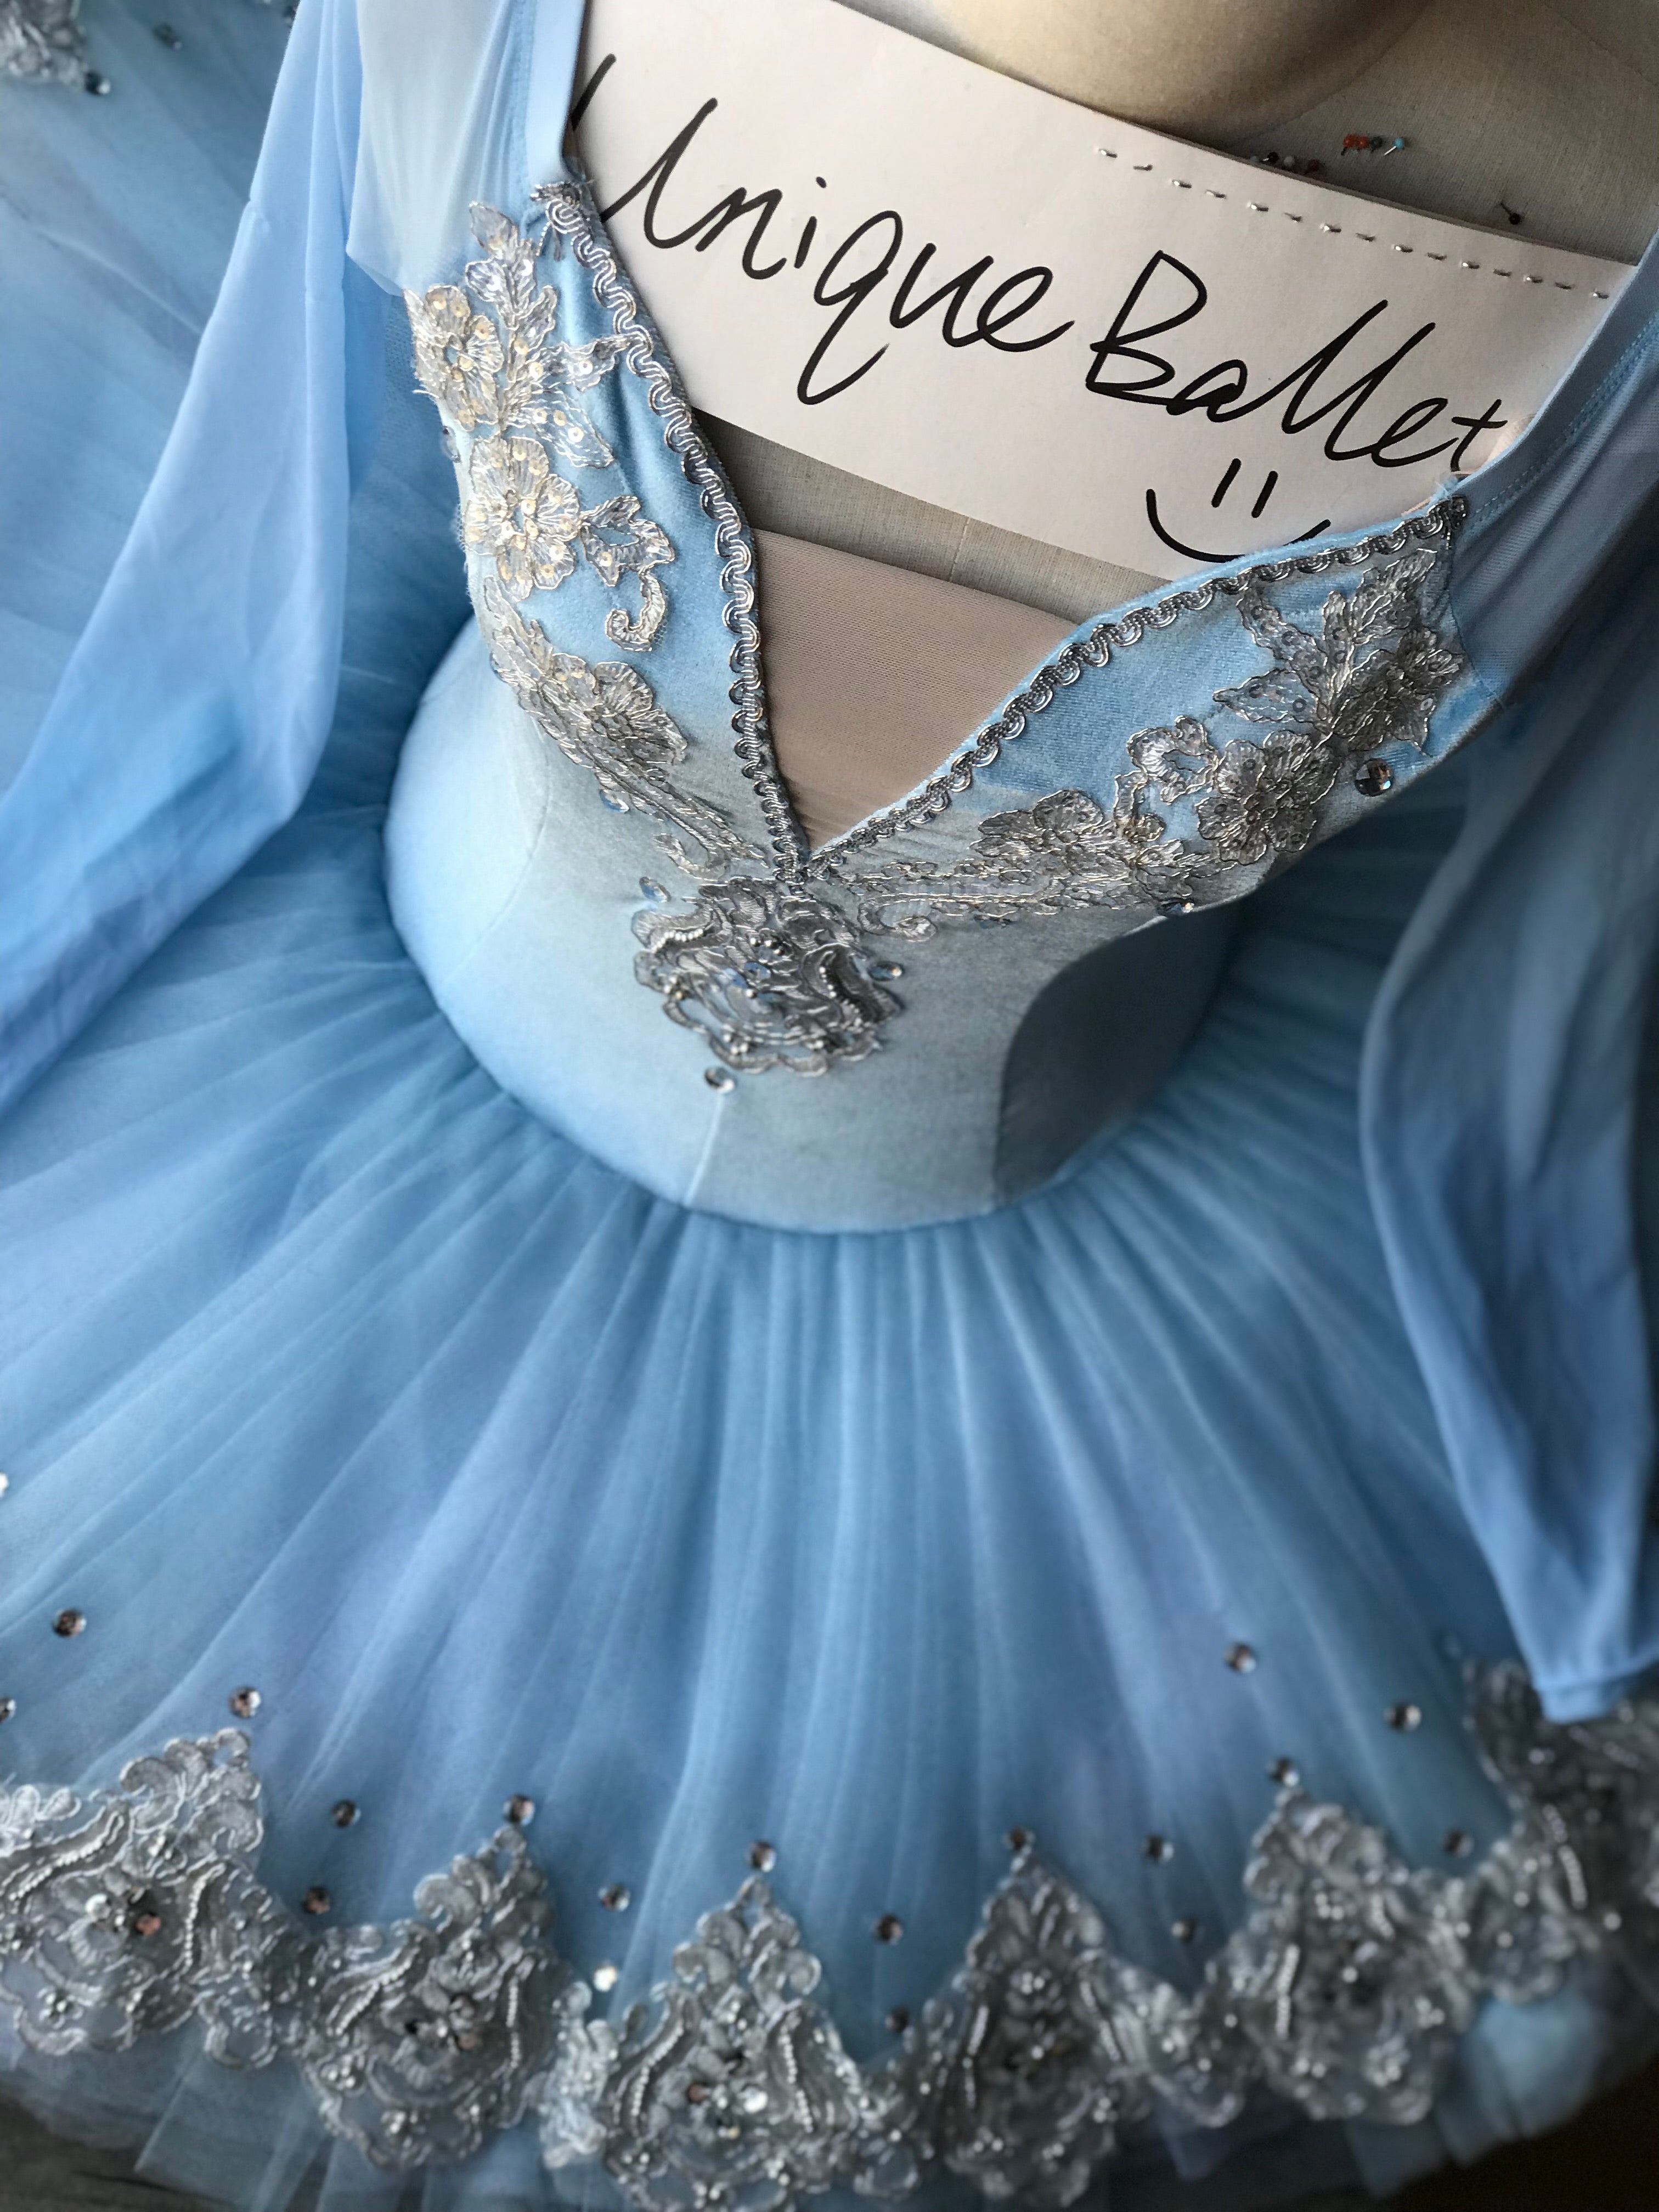 Cost-Effective Pull On Style Blue Bird Long Sleeves Sleeping Beauty Cinderella Alice Ice Queen Snow Queen Classical Ballet Costume Tutu